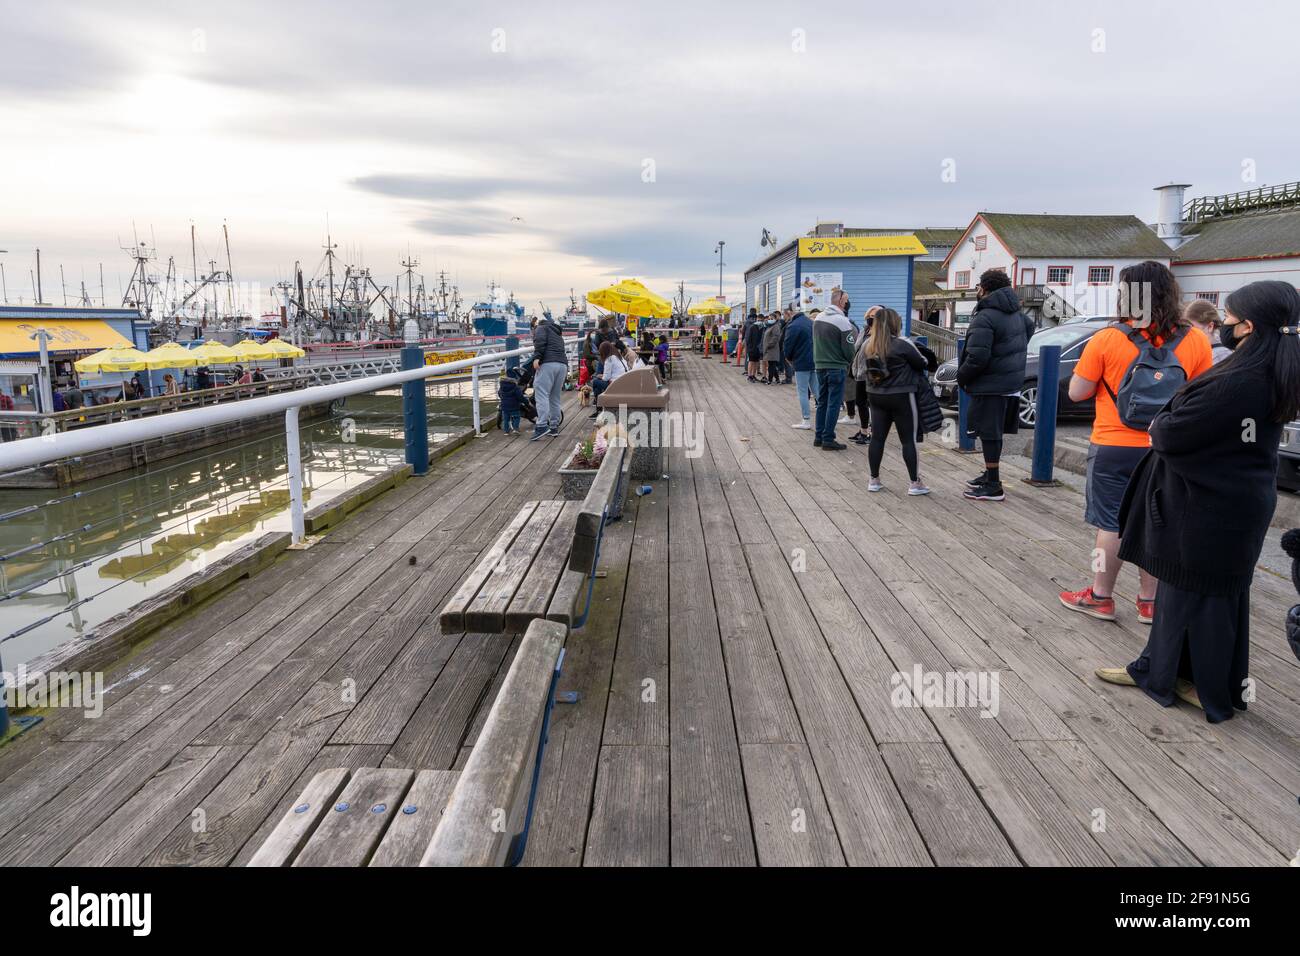 Steveston Harbour Fisherman's Wharf. People line up to buy famous Pajo's Fish and Chips food. Stock Photo